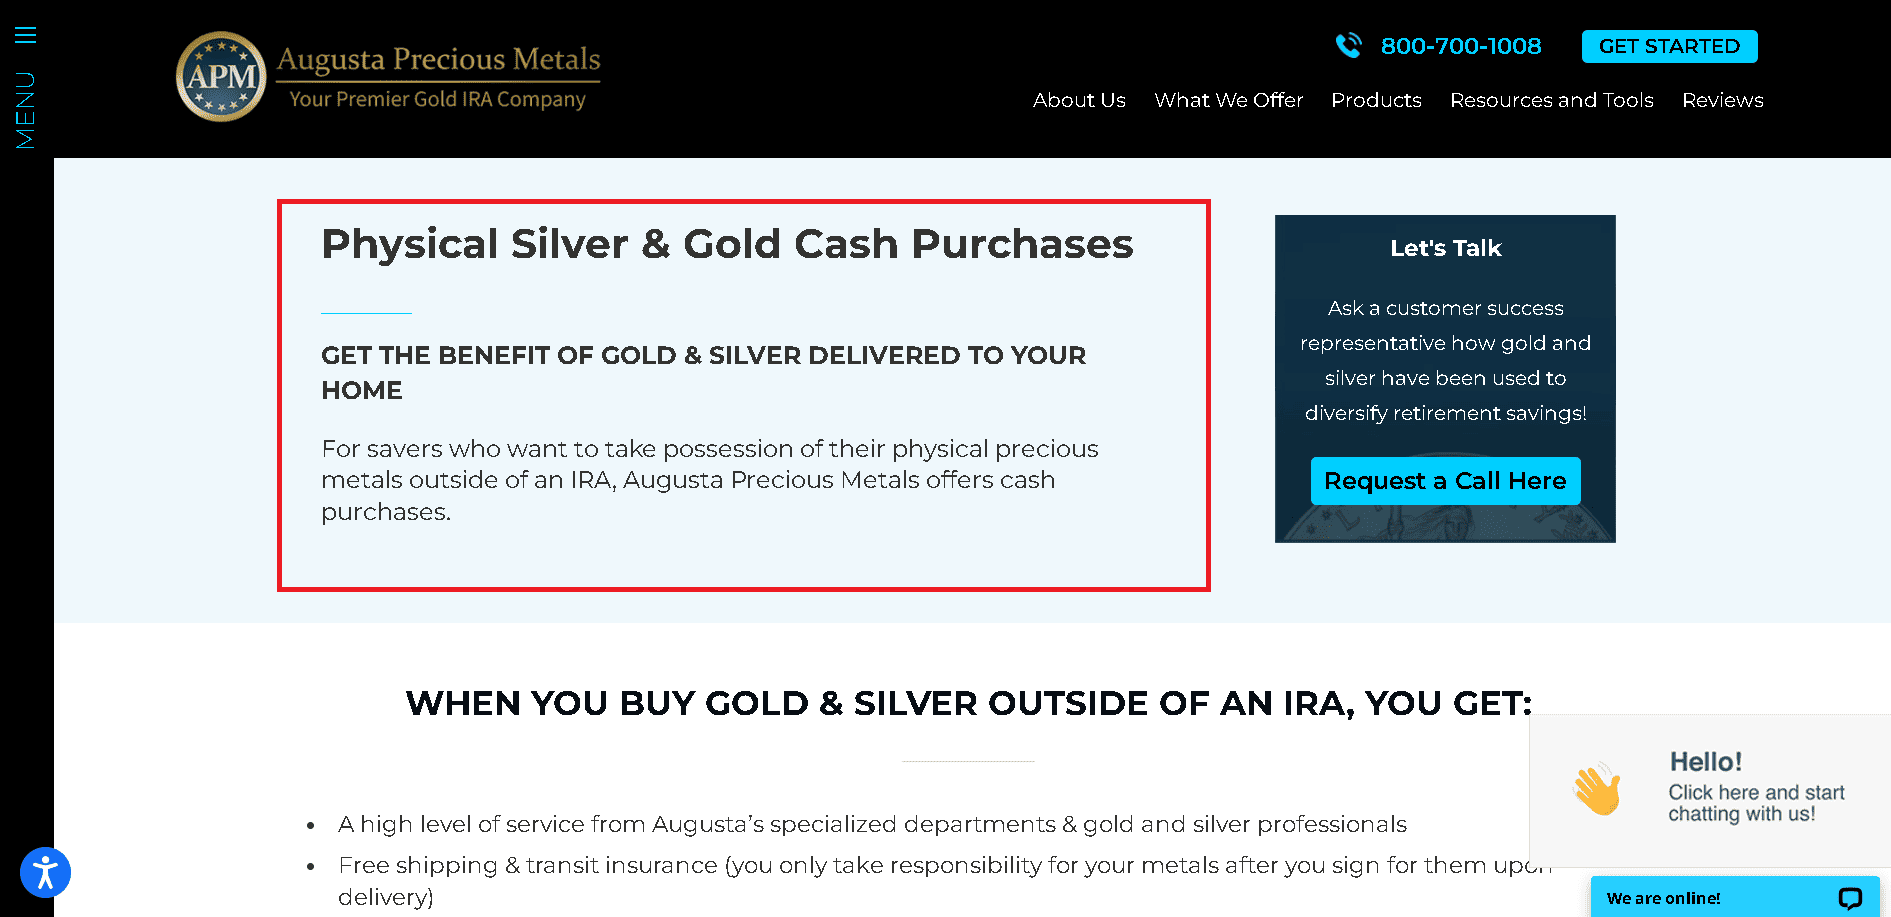 Augusta Precious Metals buy gold and silver for cash